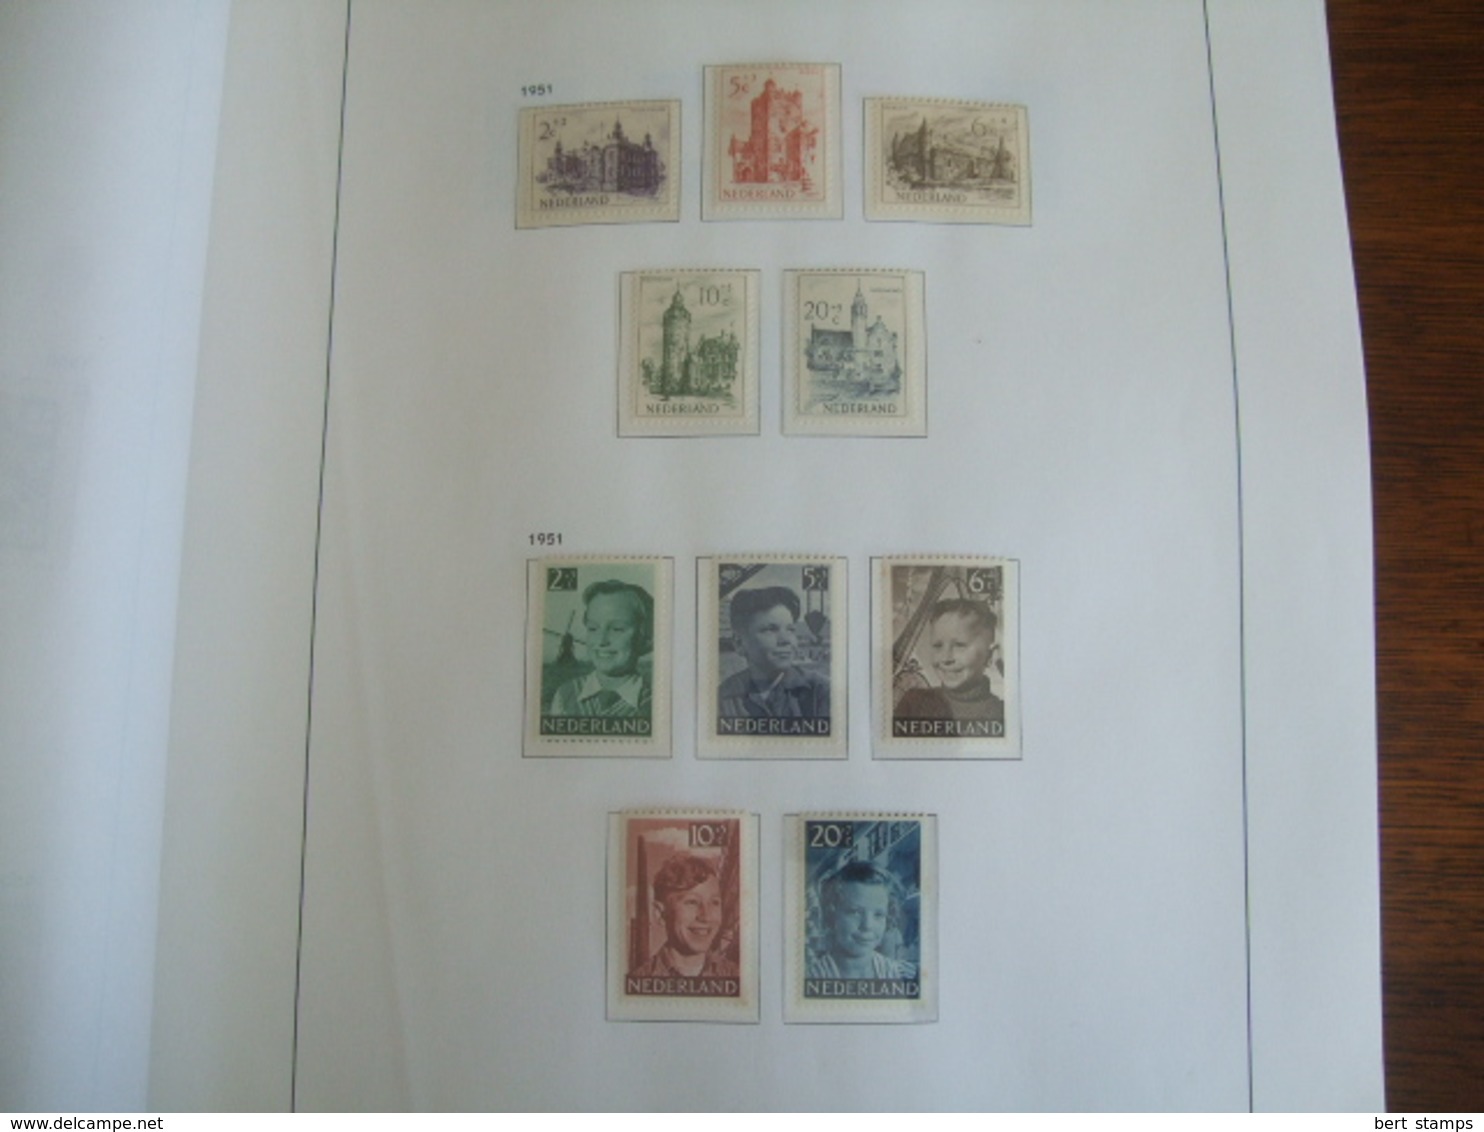 Mooie collectie Nederland, nice Collection Netherlands, MNH and Hinged from 1944 - 1989